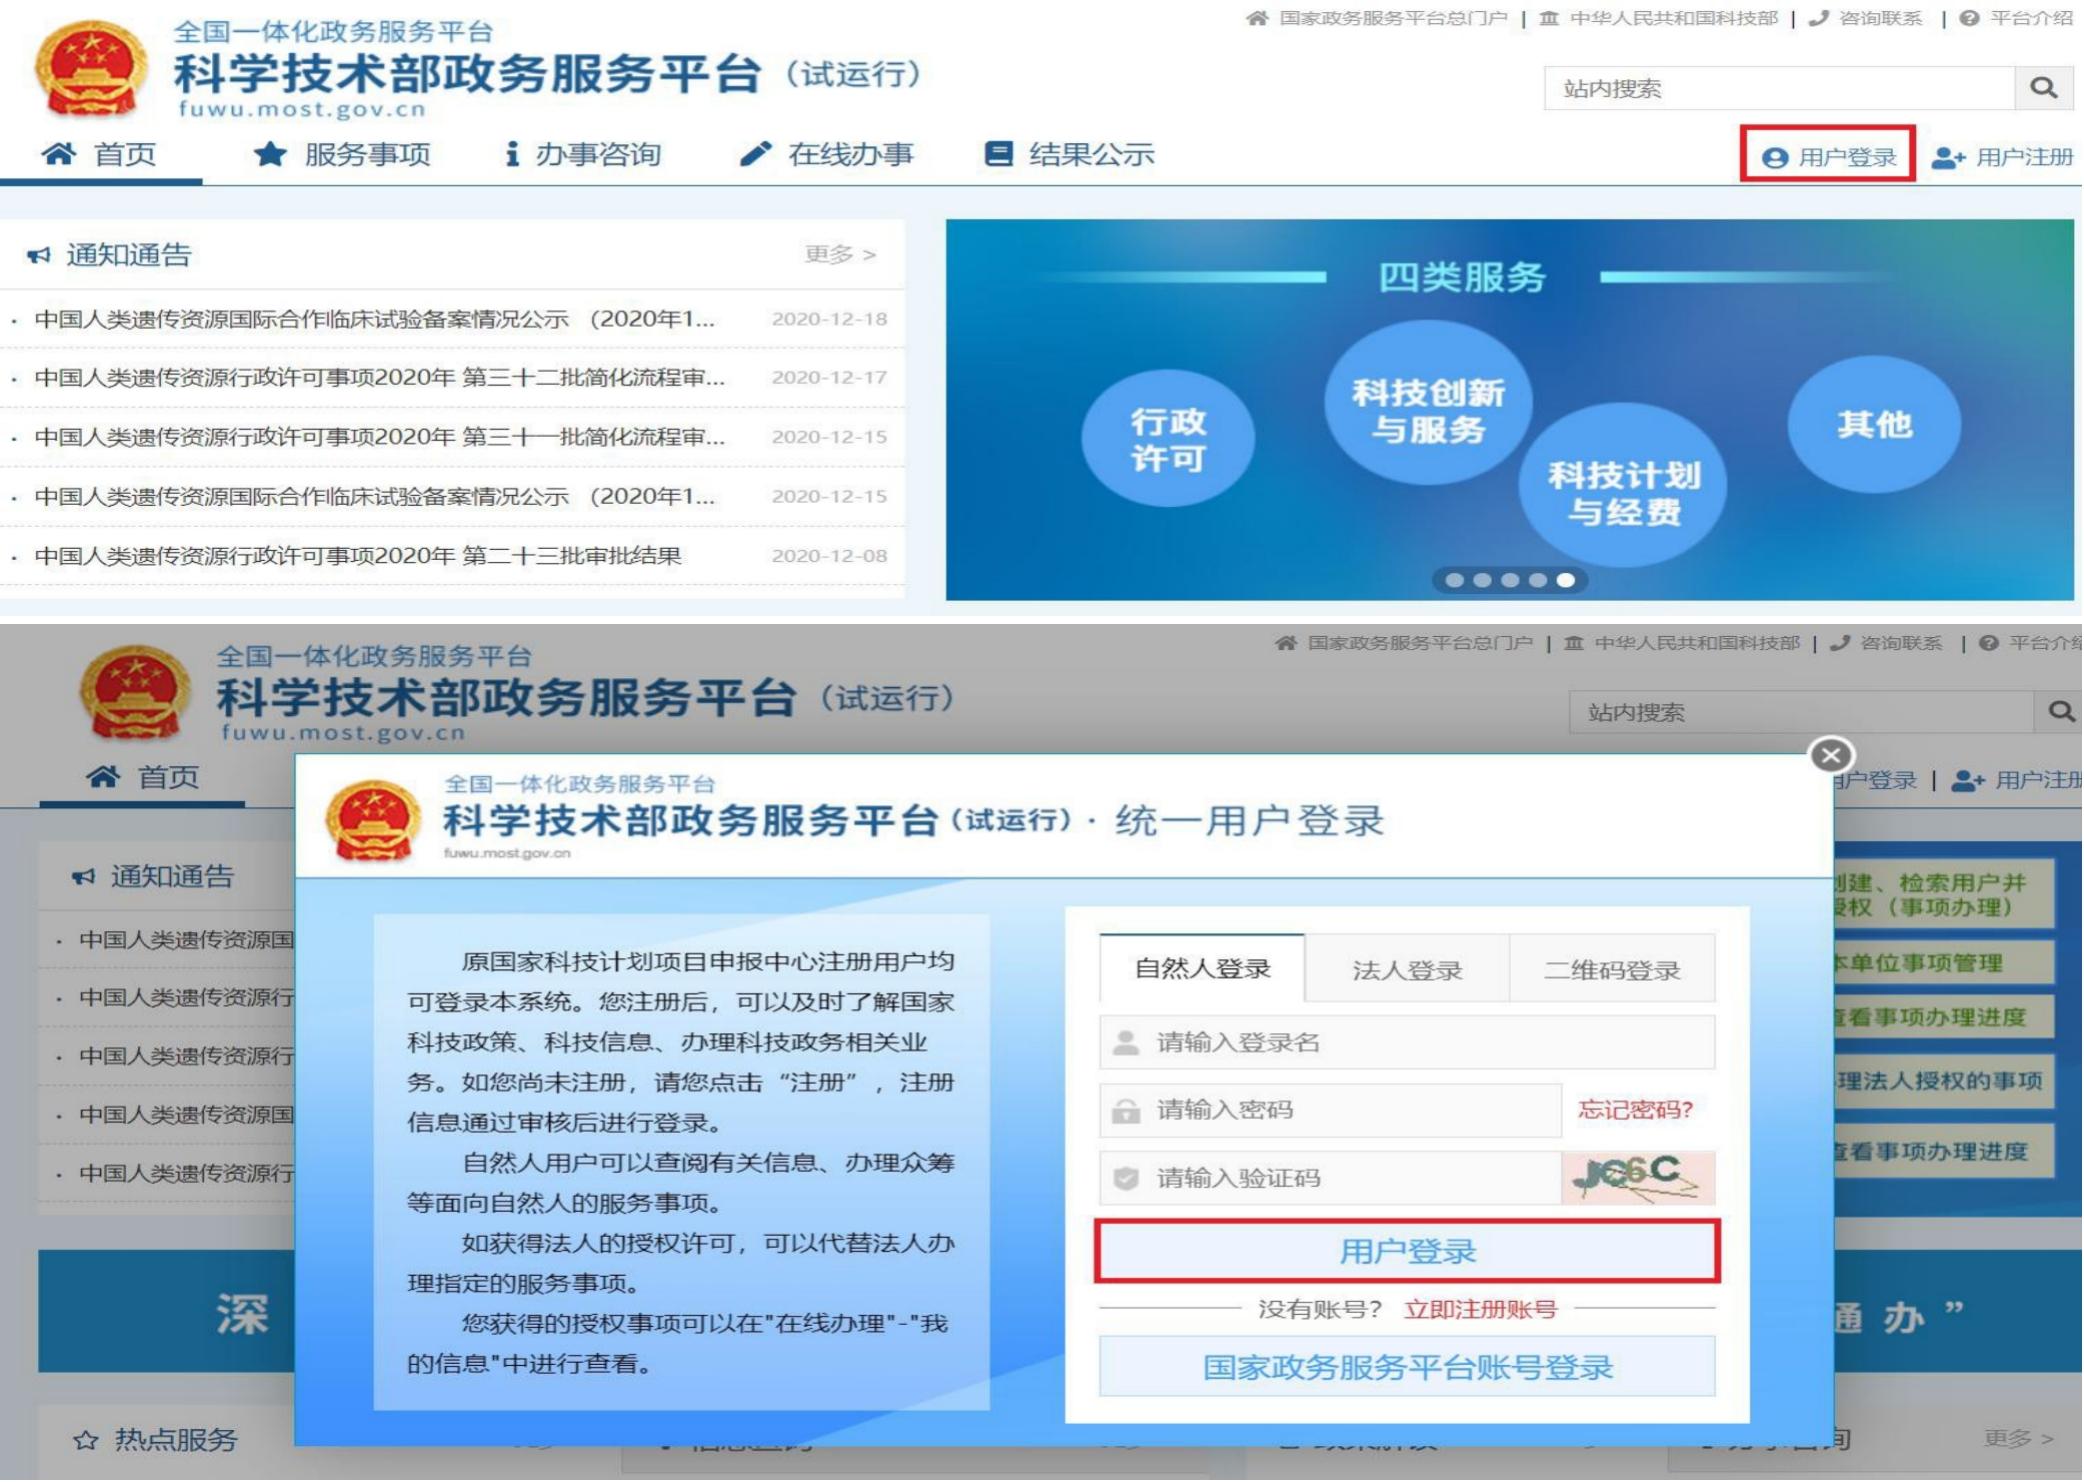 Changes to the “Service System for Foreigners Working in China”